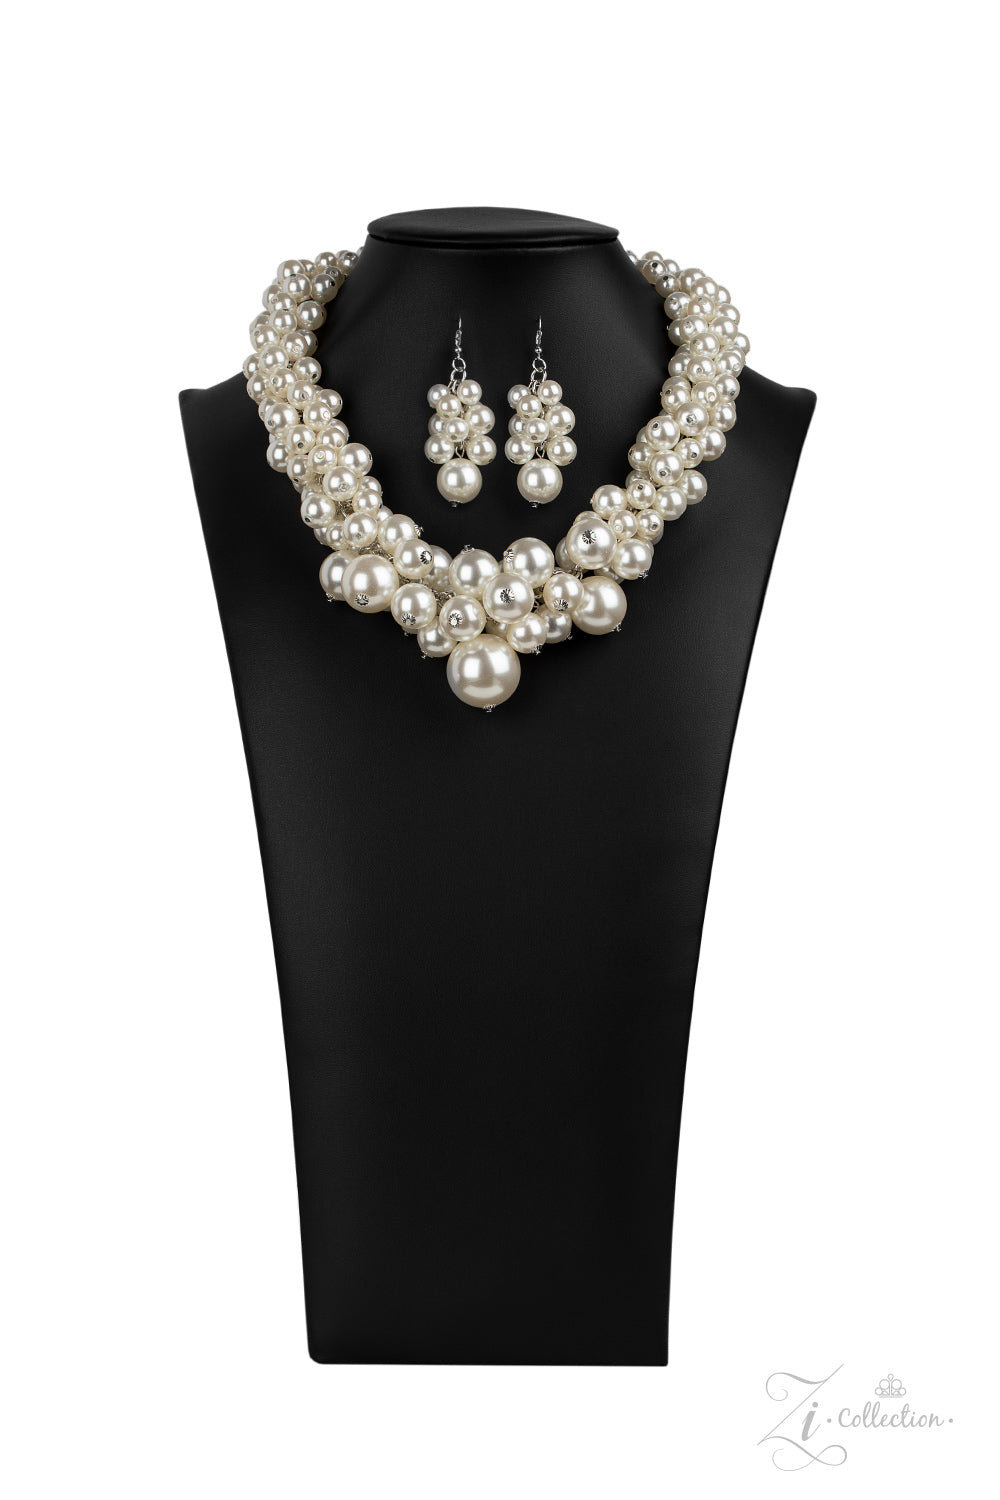 Regal White Zi Collection Paparazzi Necklace Cashmere Pink Jewels